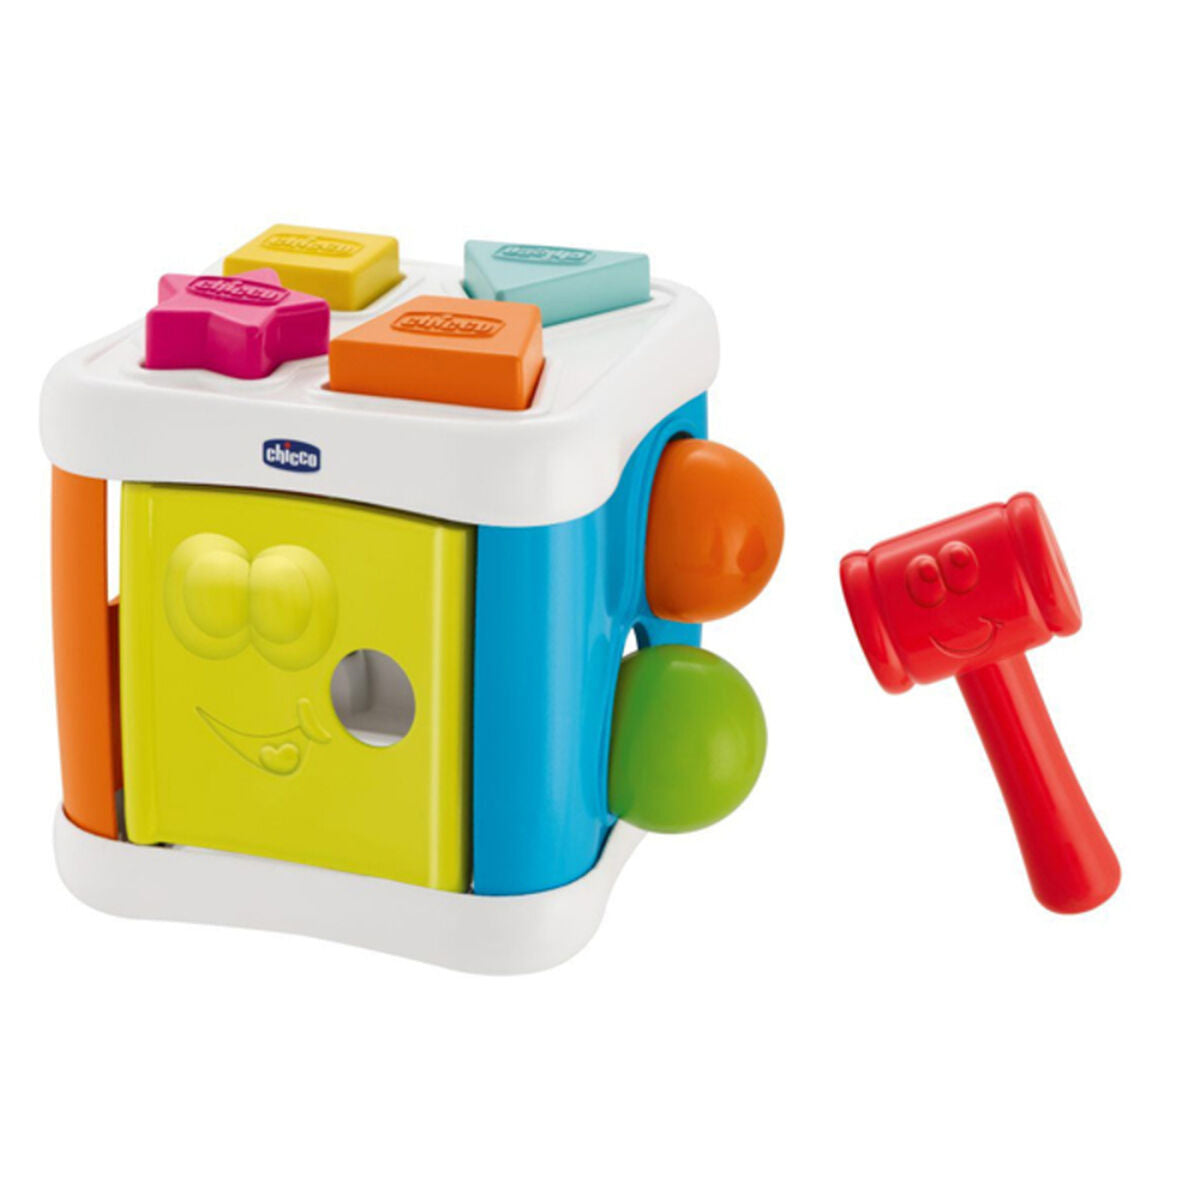 Puzzel Chicco 9686000000 2 in 1 Ingebed